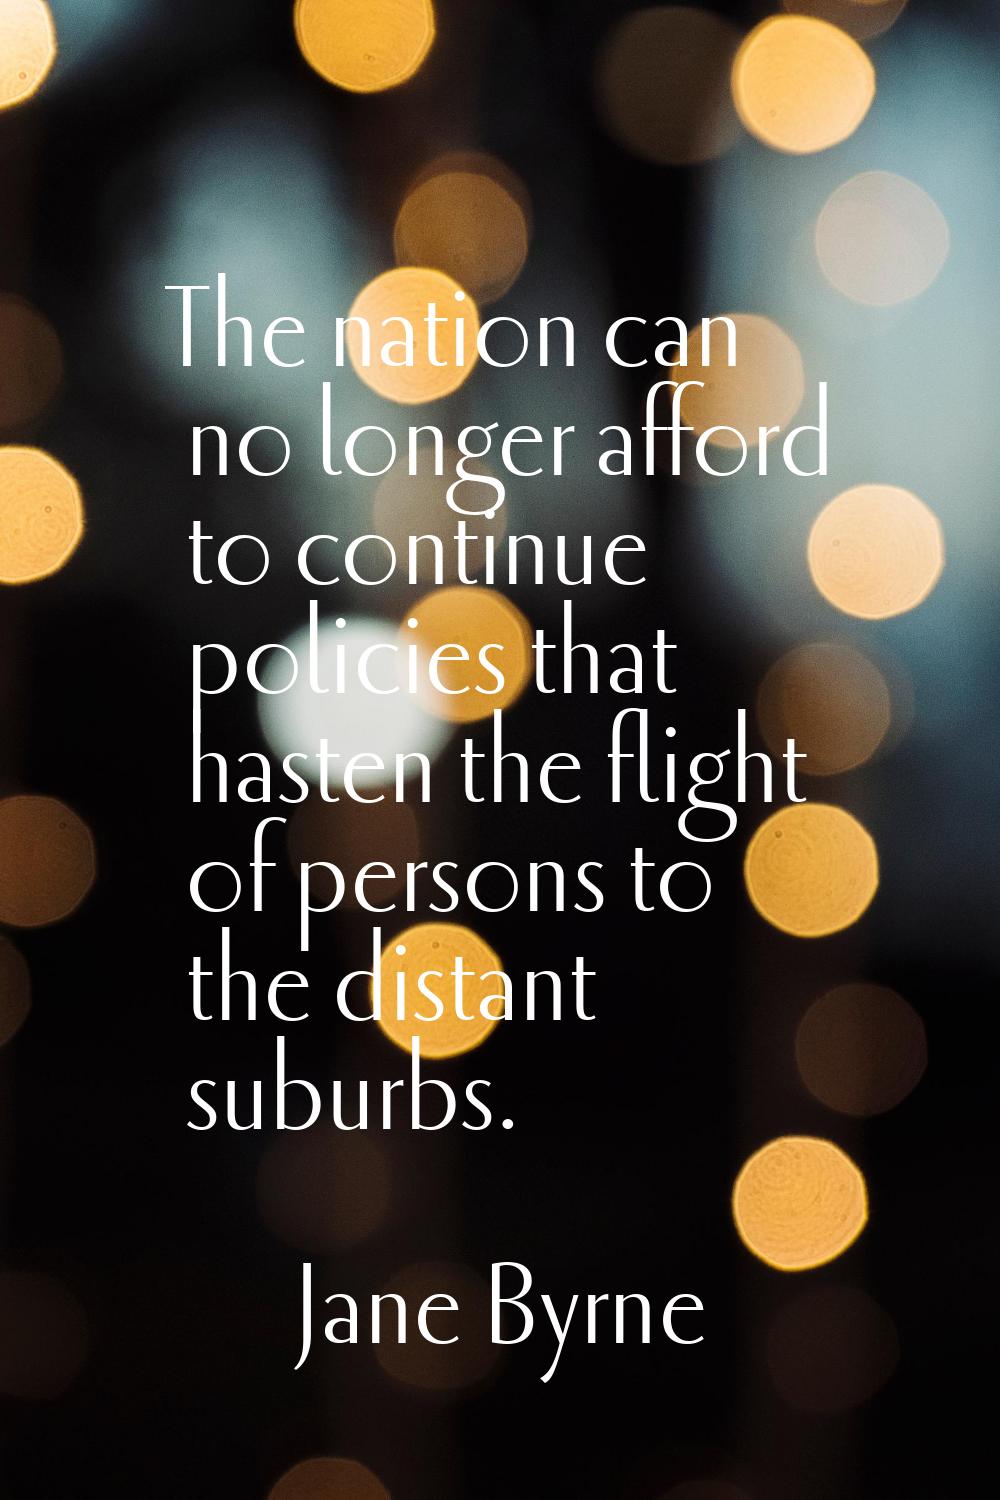 The nation can no longer afford to continue policies that hasten the flight of persons to the dista